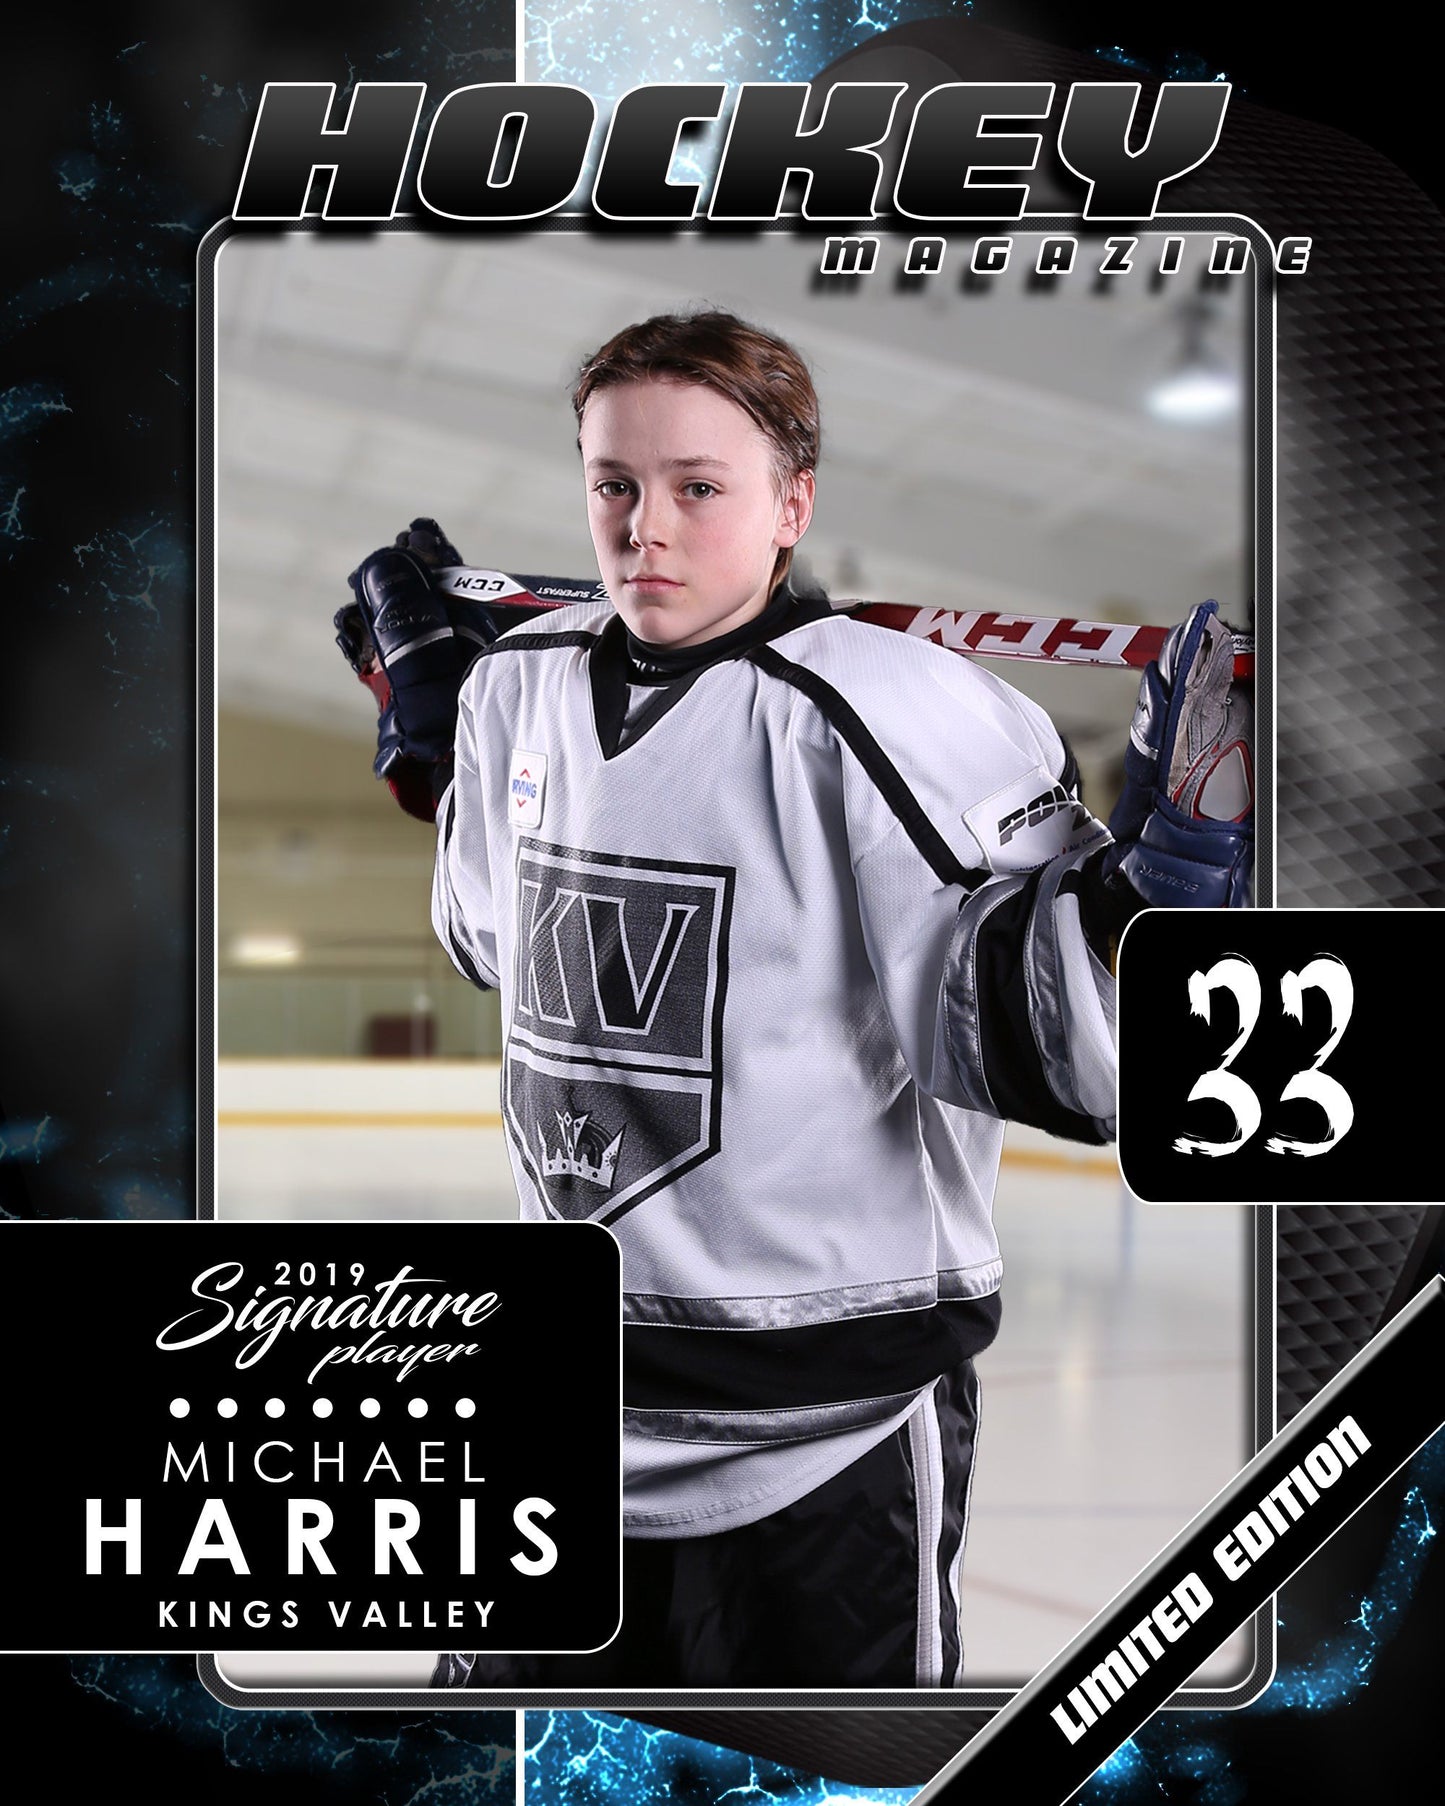 Signature Player - Hockey - V1 - Drop-In Magazine Cover Template-Photoshop Template - Photo Solutions